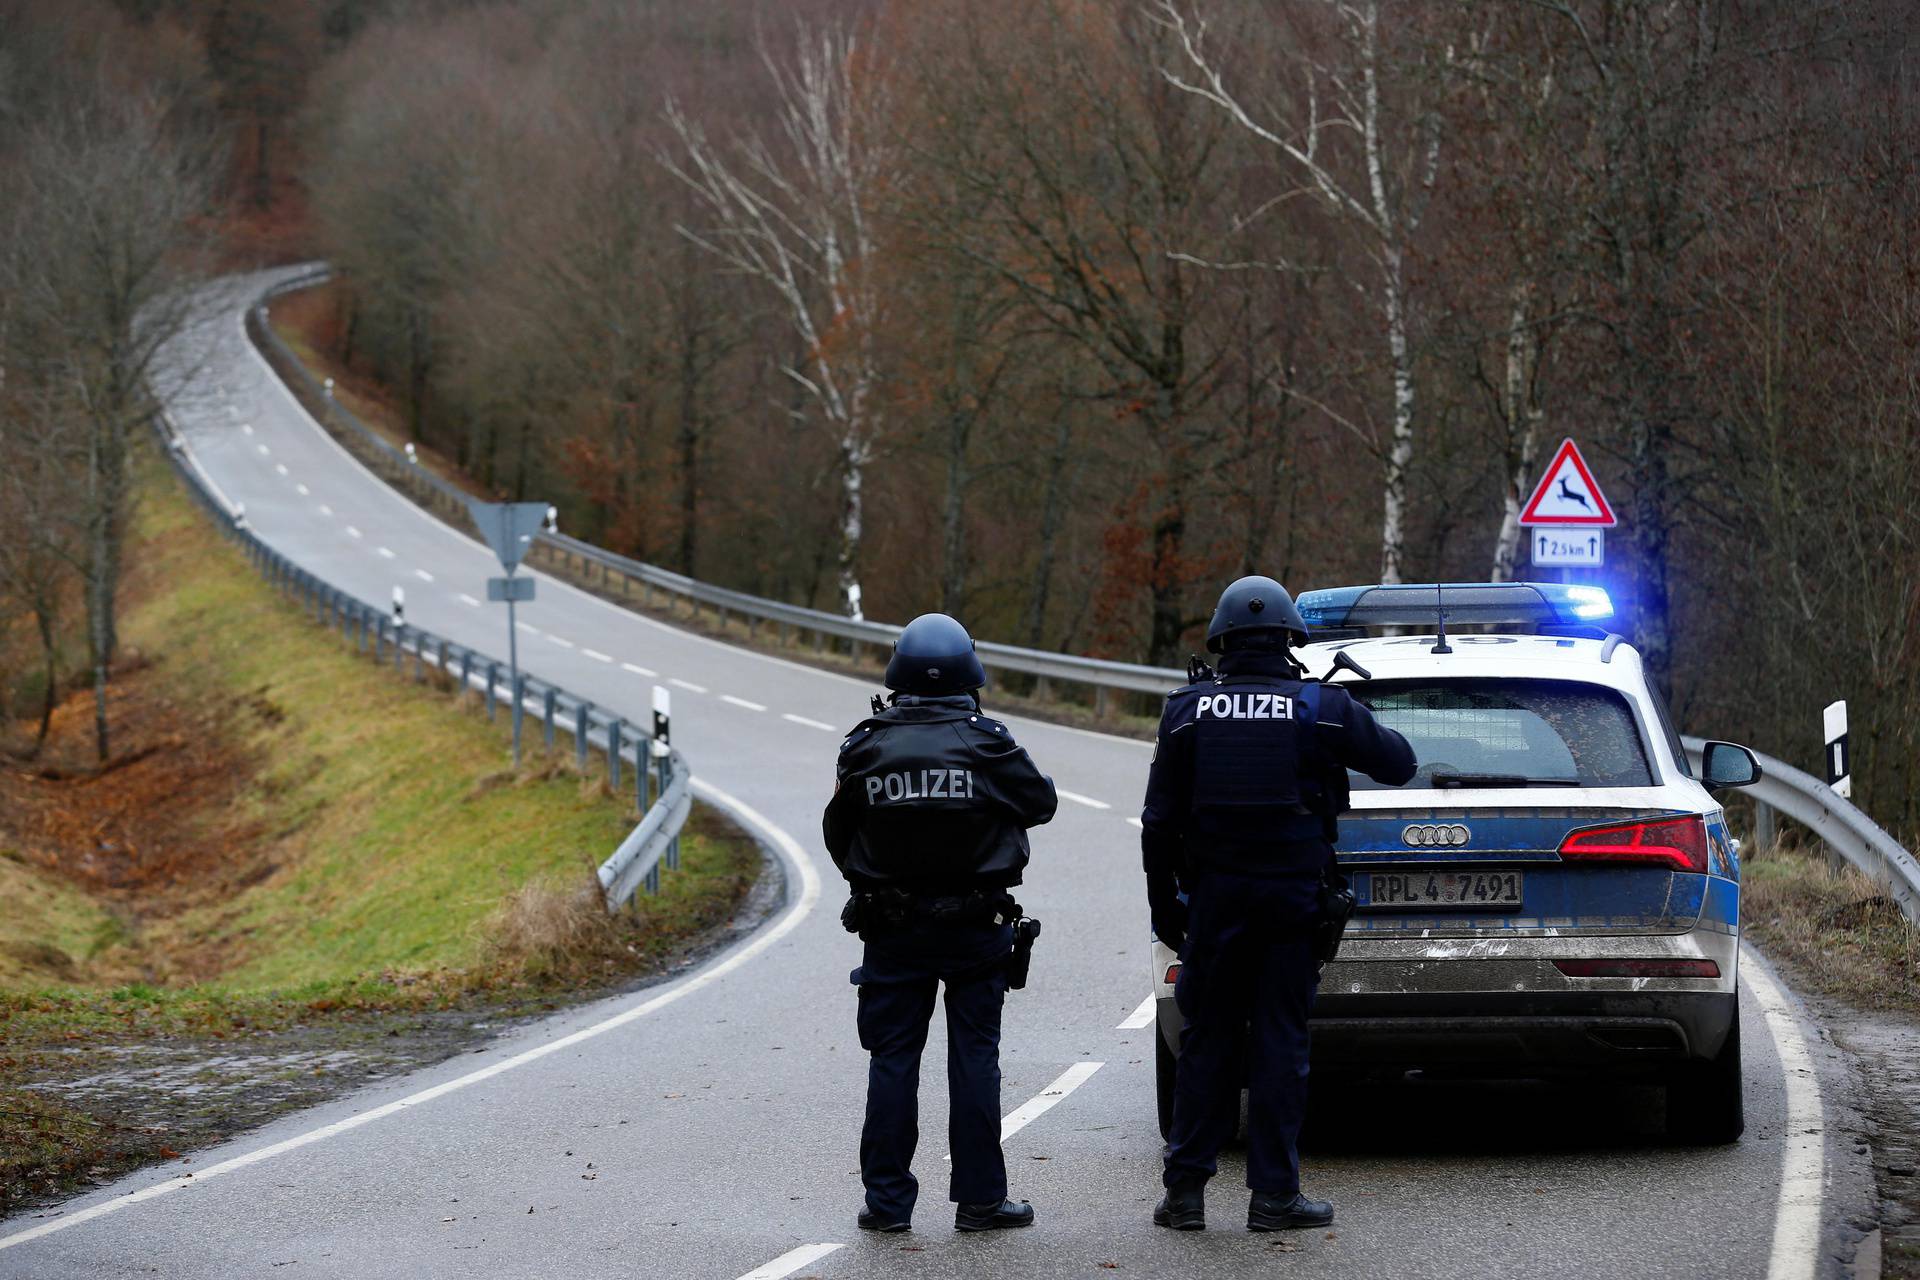 Two German police officers killed during routine traffic stop near Kusel